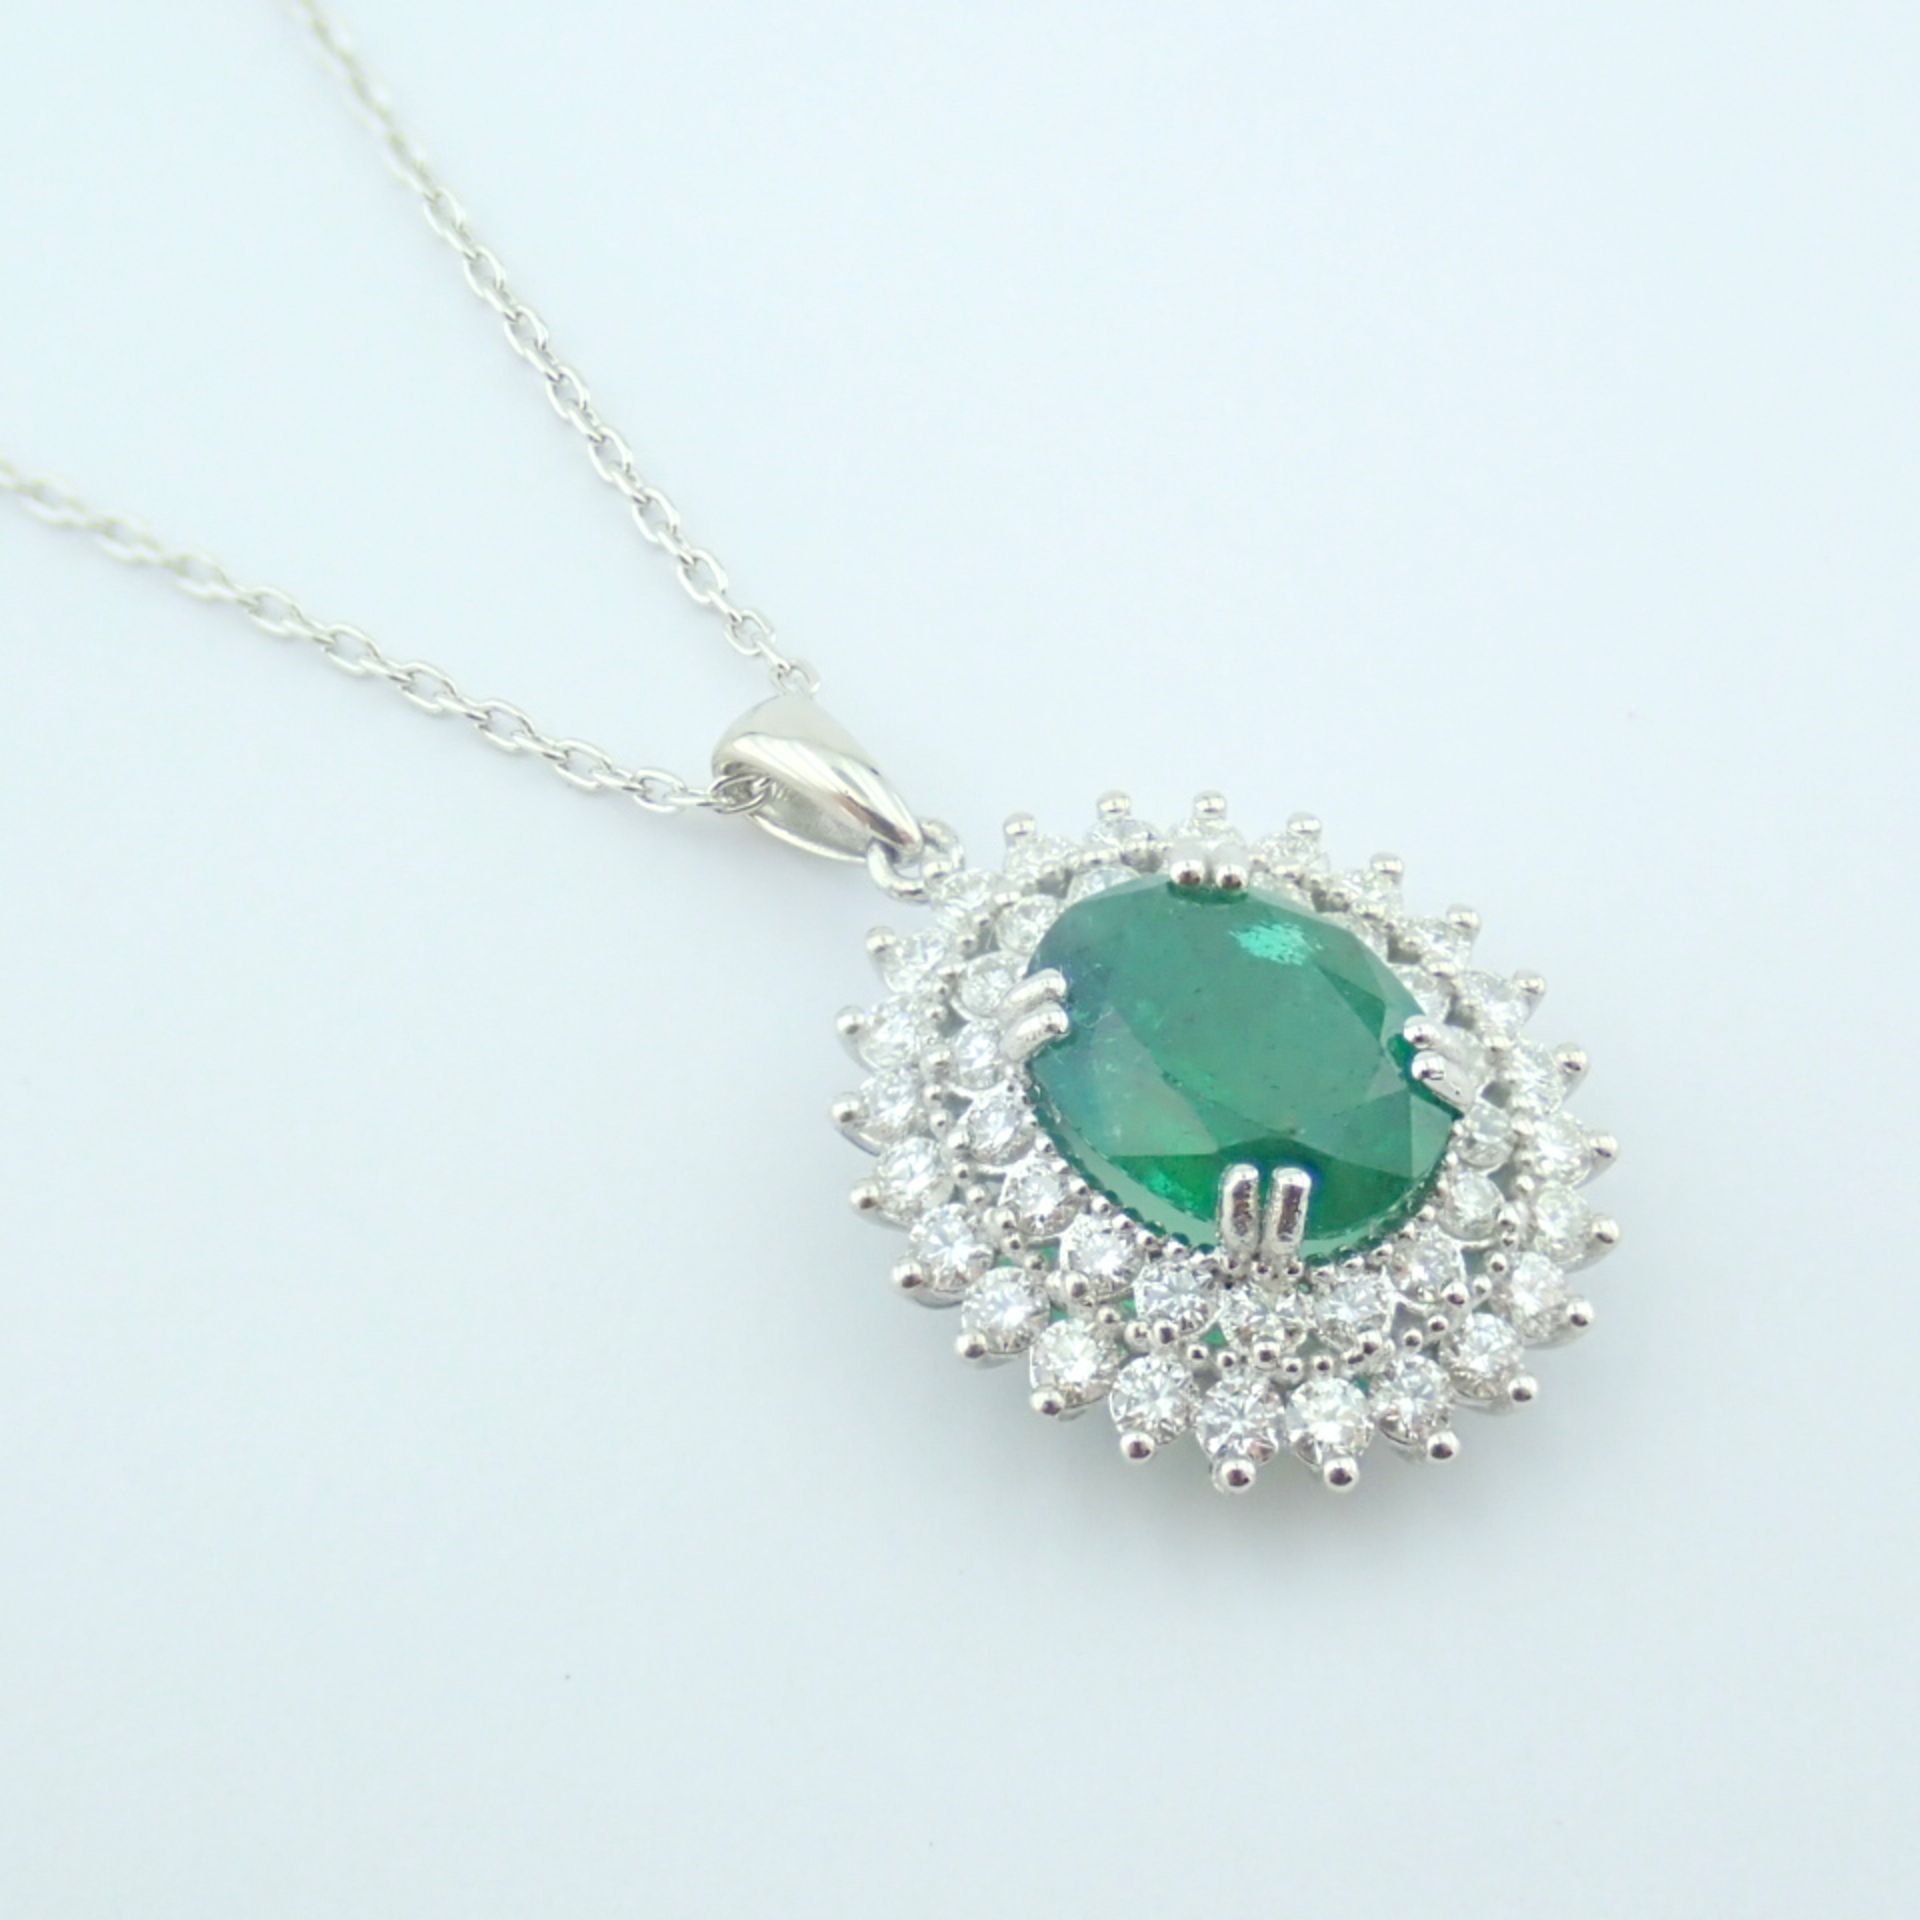 Certificated 14K White Gold Diamond & Emerald Necklace - Image 9 of 11